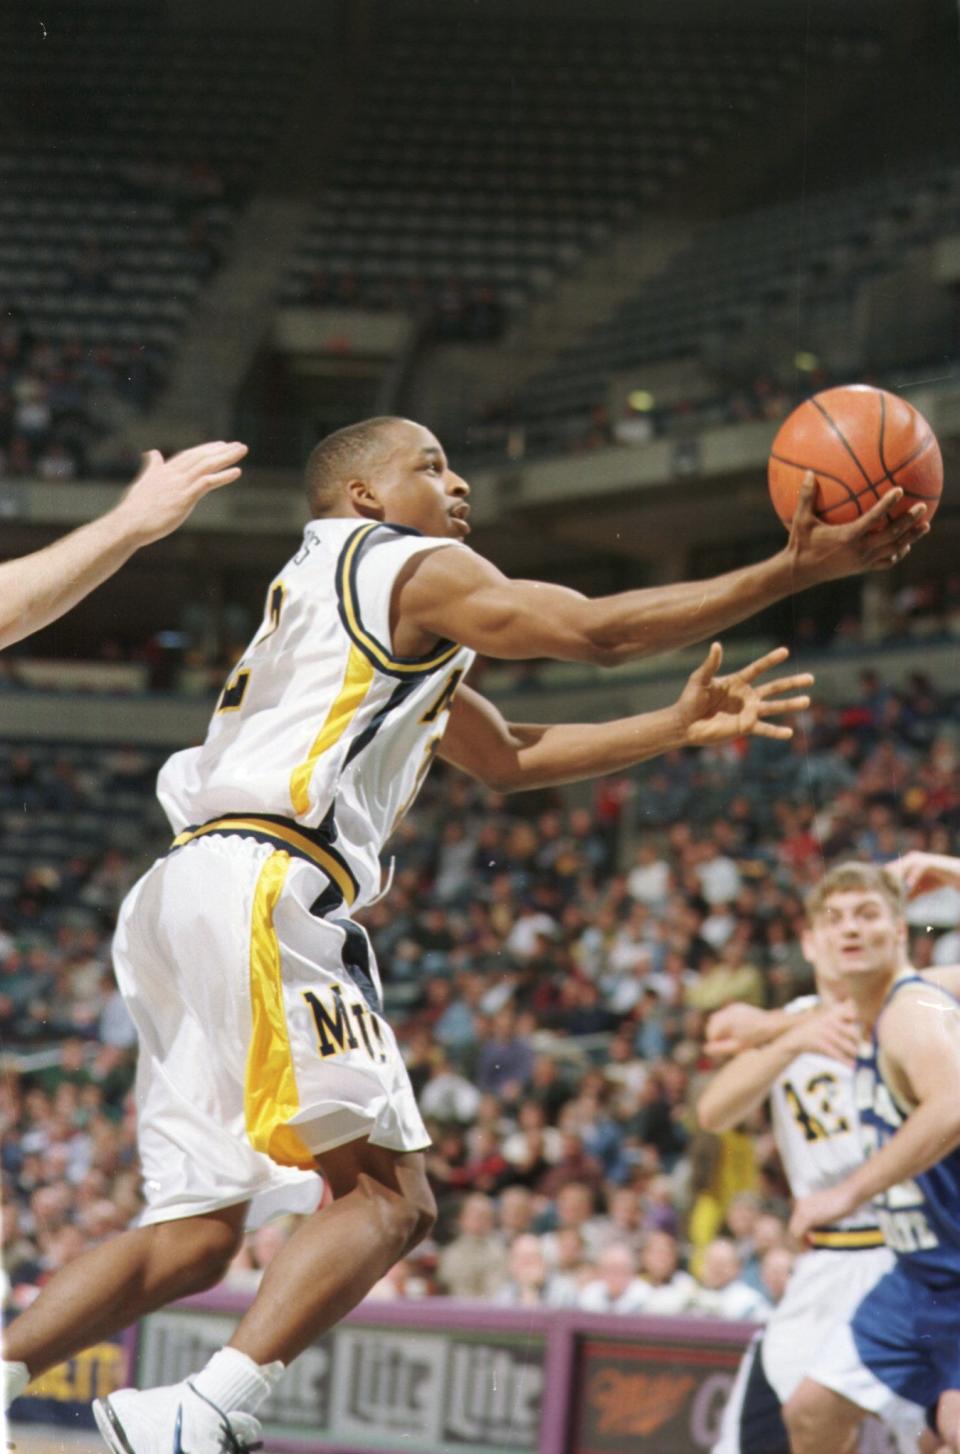 Marquette's Aaron Hutchins drives for a score in the Bank One Classic vs. Montana State in 1997.